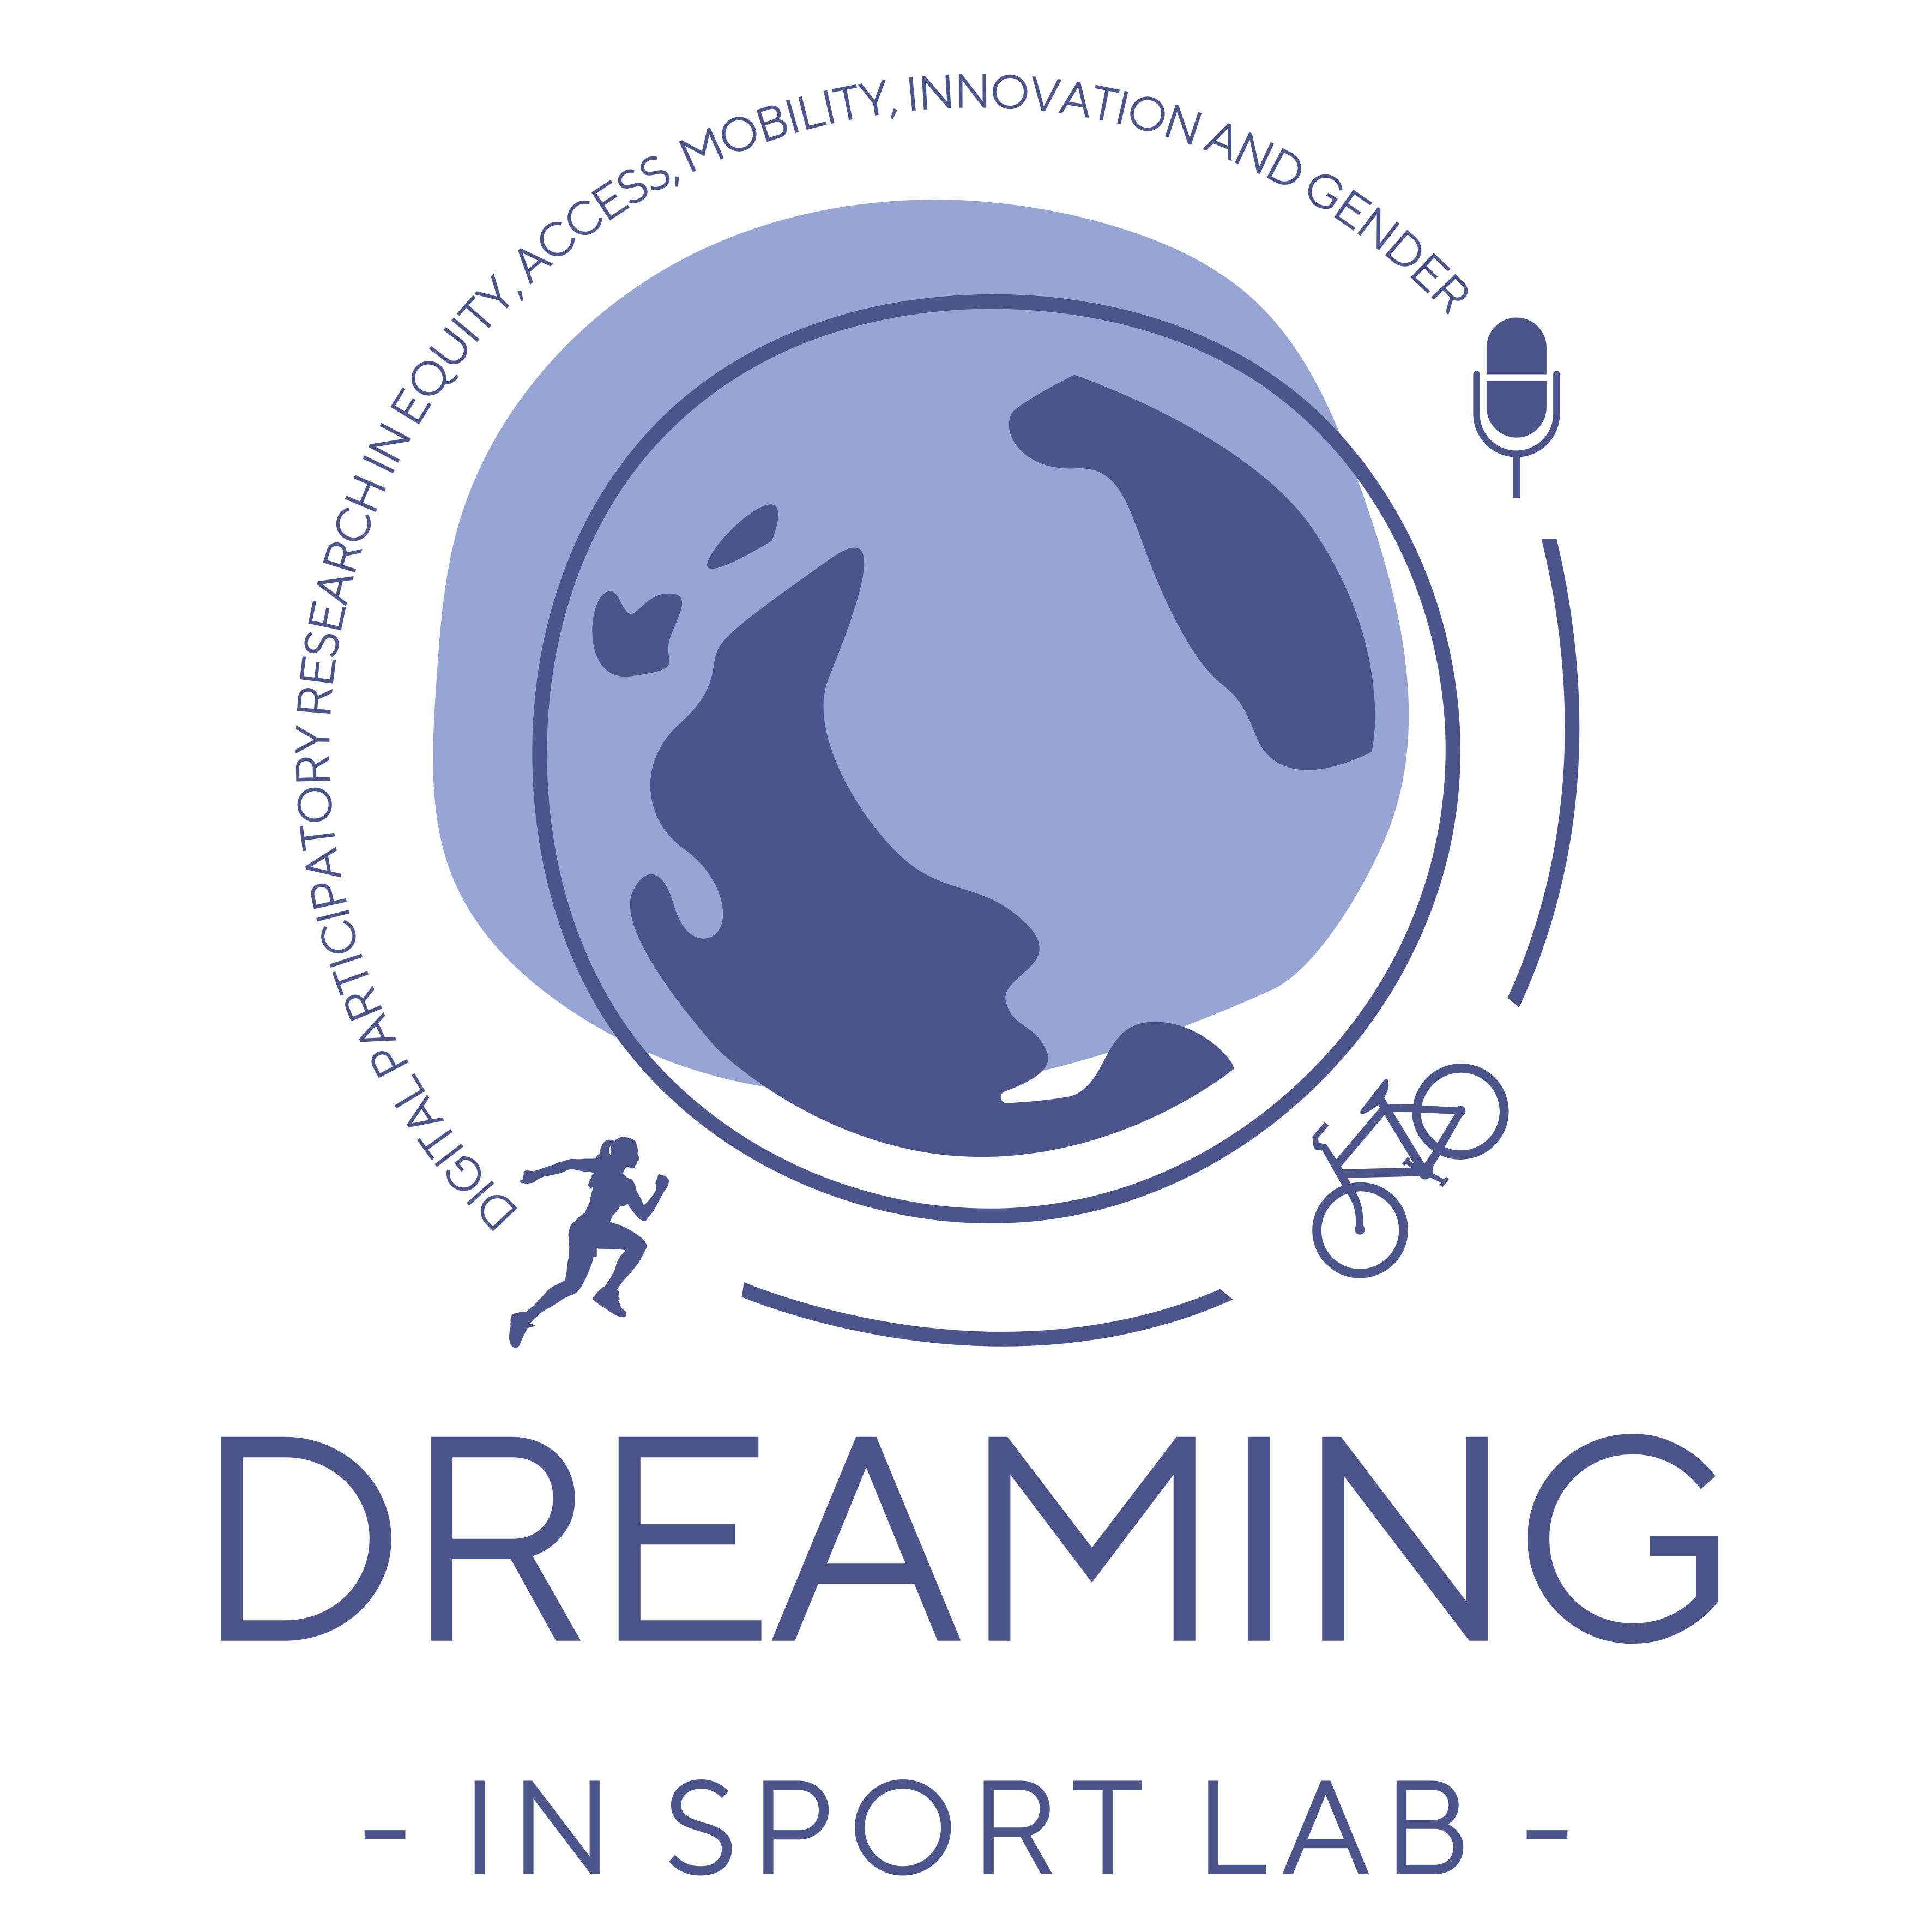 The DREAMING Sport Lab